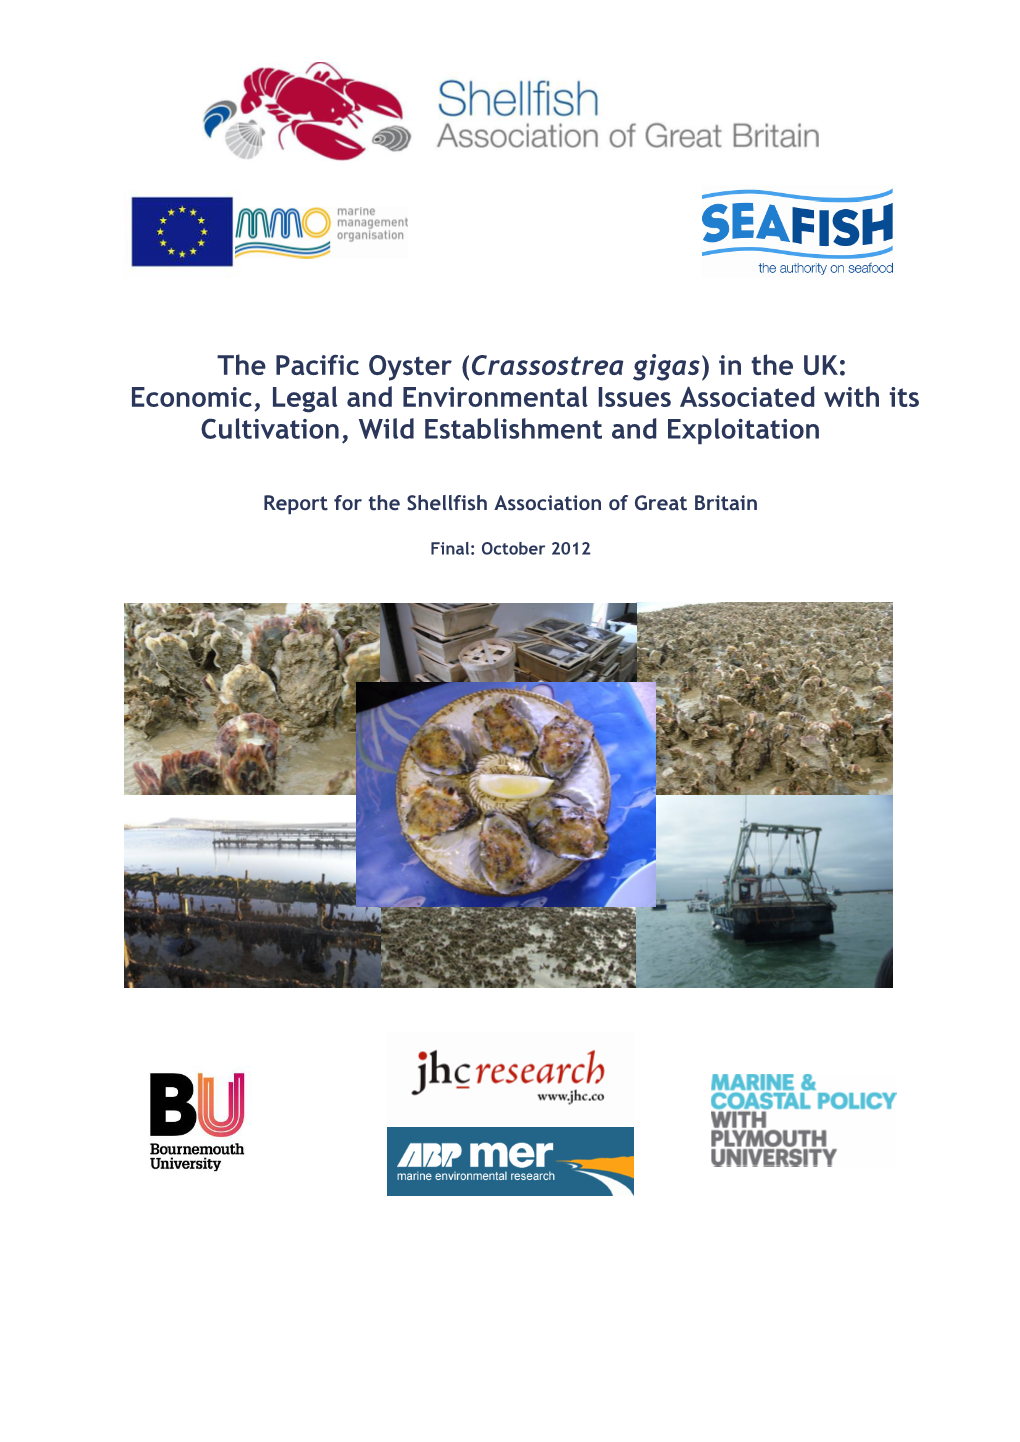 The Pacific Oyster (Crassostrea Gigas) in the UK: Economic, Legal and Environmental Issues Associated with Its Cultivation, Wild Establishment and Exploitation